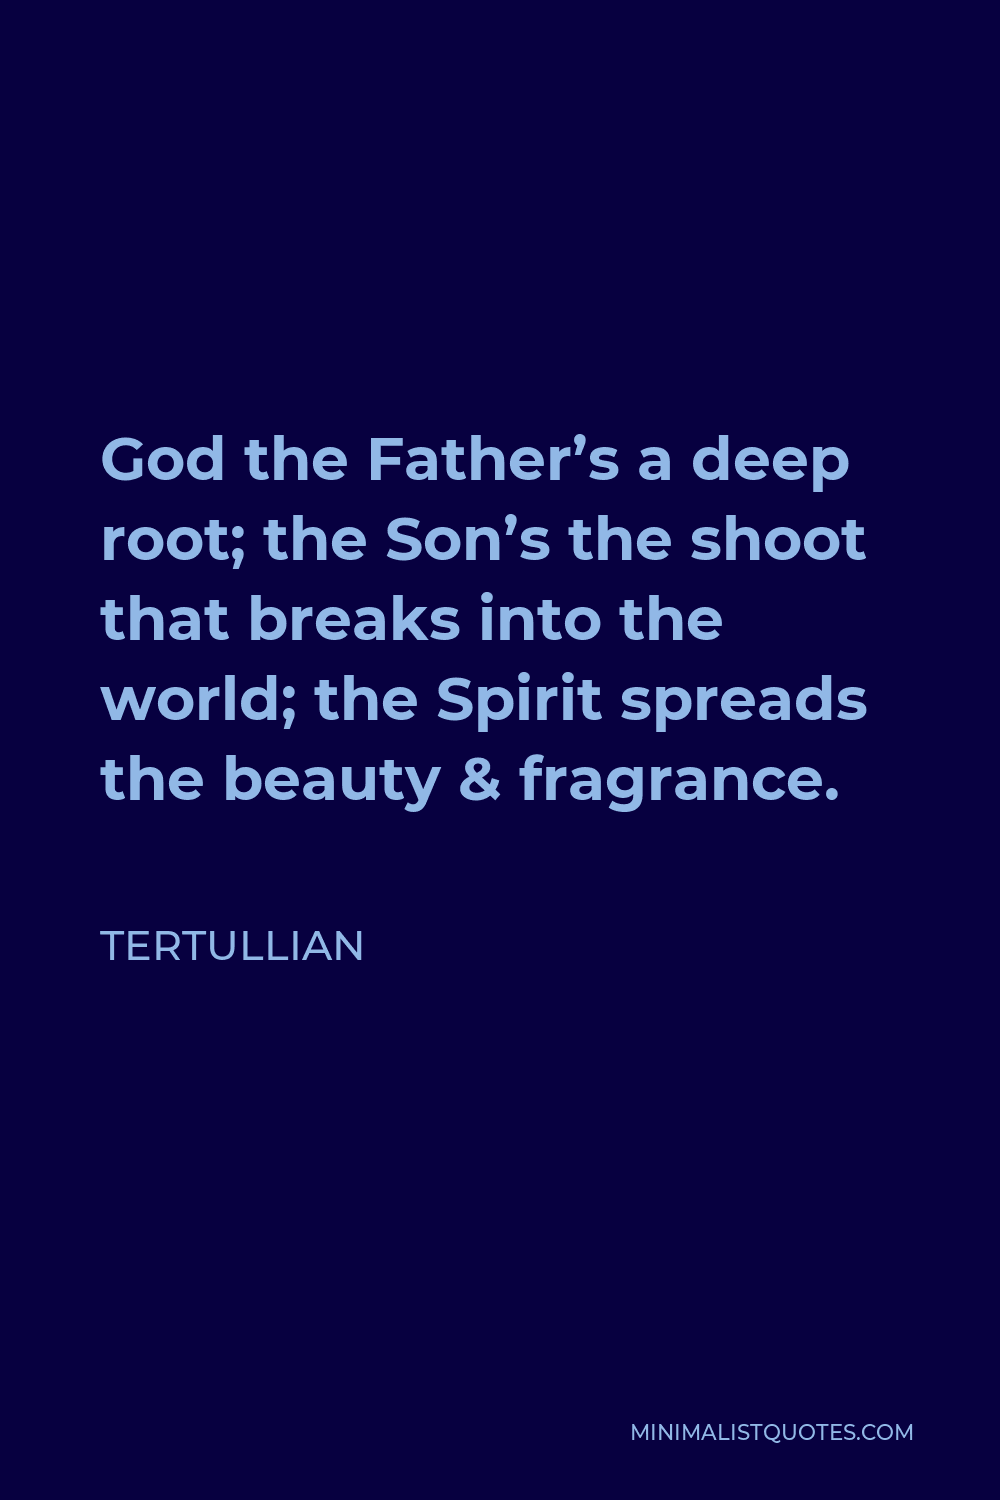 Tertullian Quote - God the Father’s a deep root; the Son’s the shoot that breaks into the world; the Spirit spreads the beauty & fragrance.